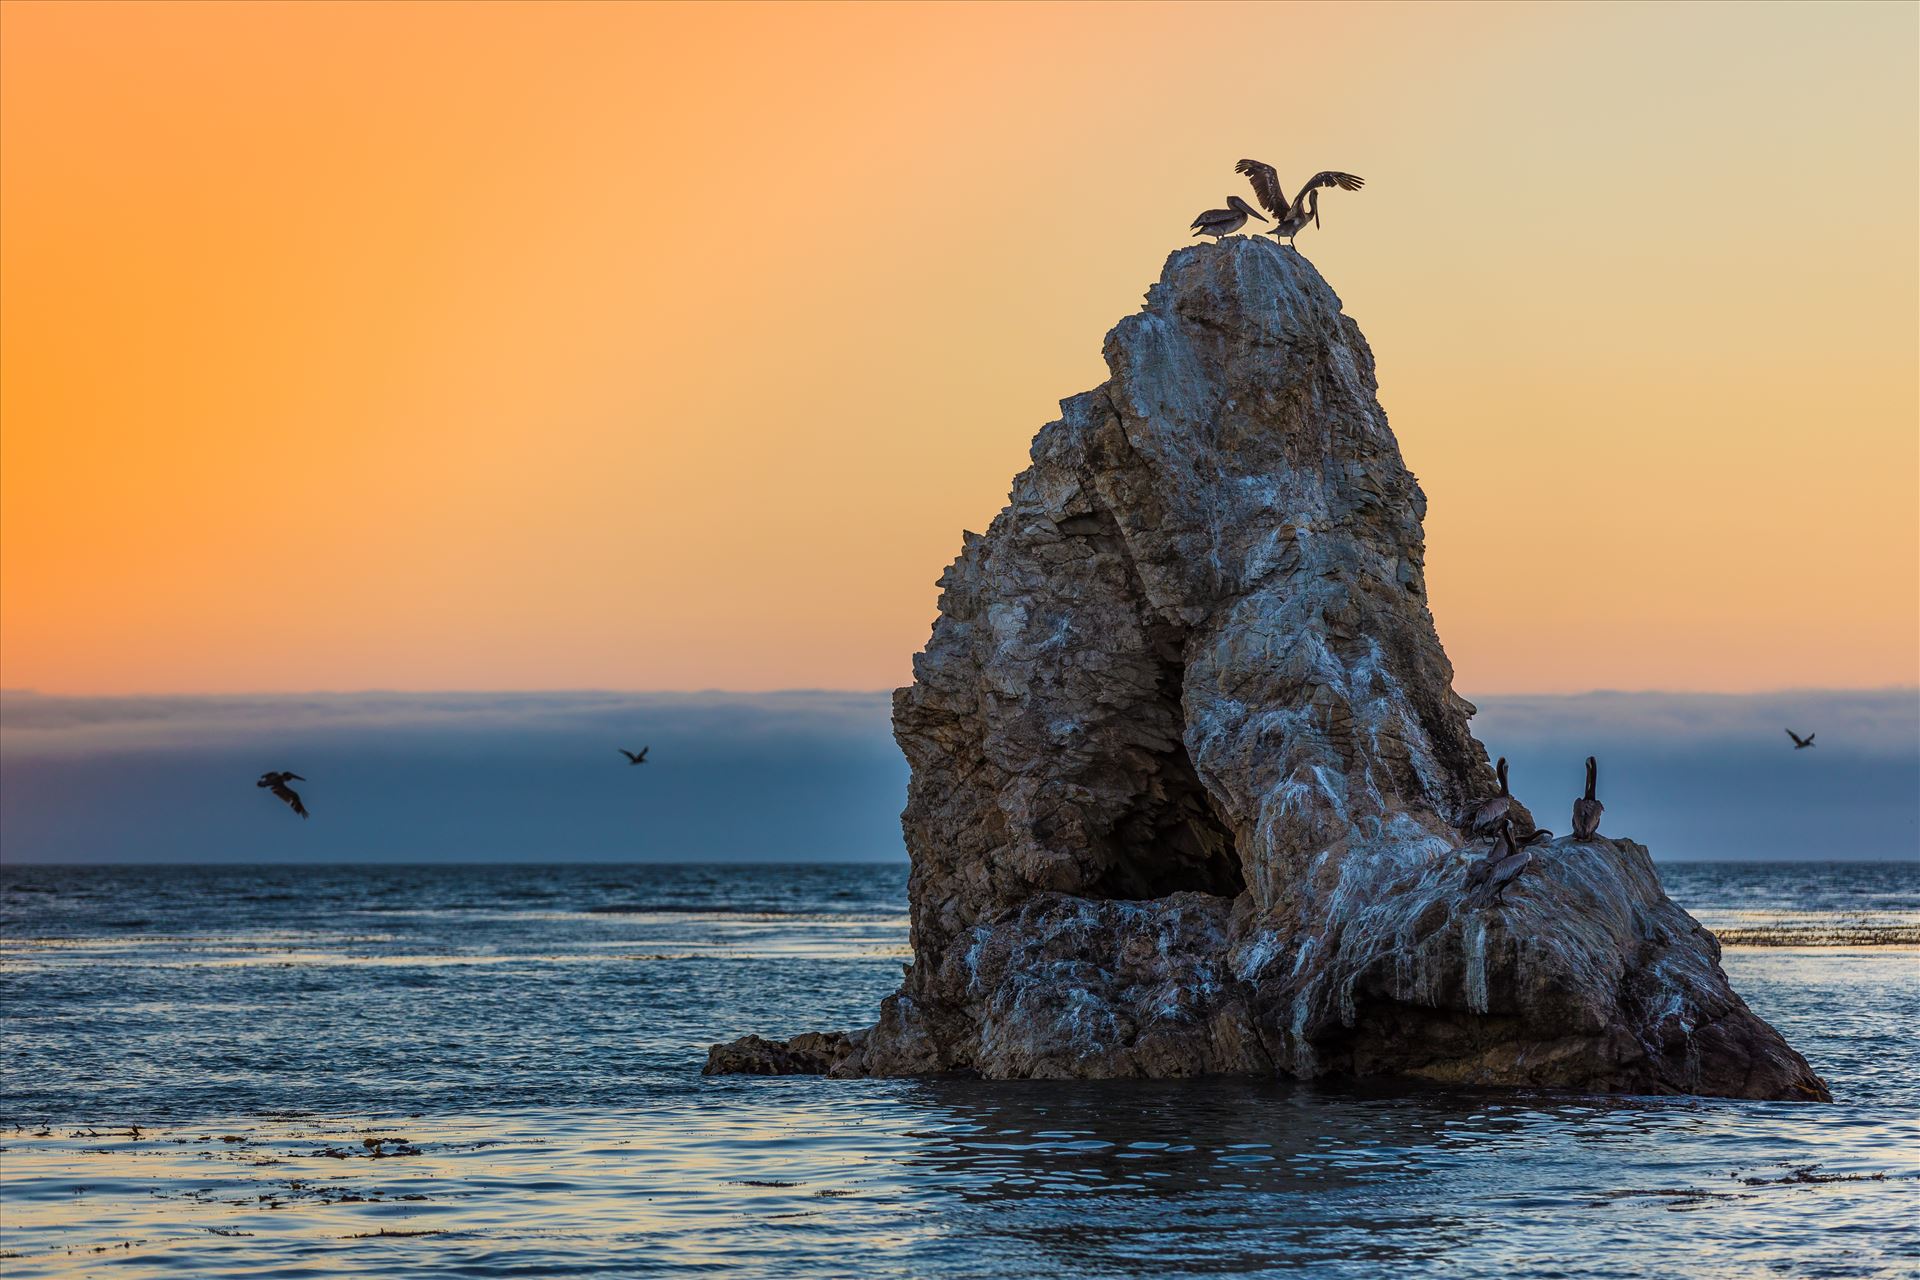 Pelican Rock Pelicans roosting, taken from the edge of the beach Pismo Beach, California by Scott Smith Photos